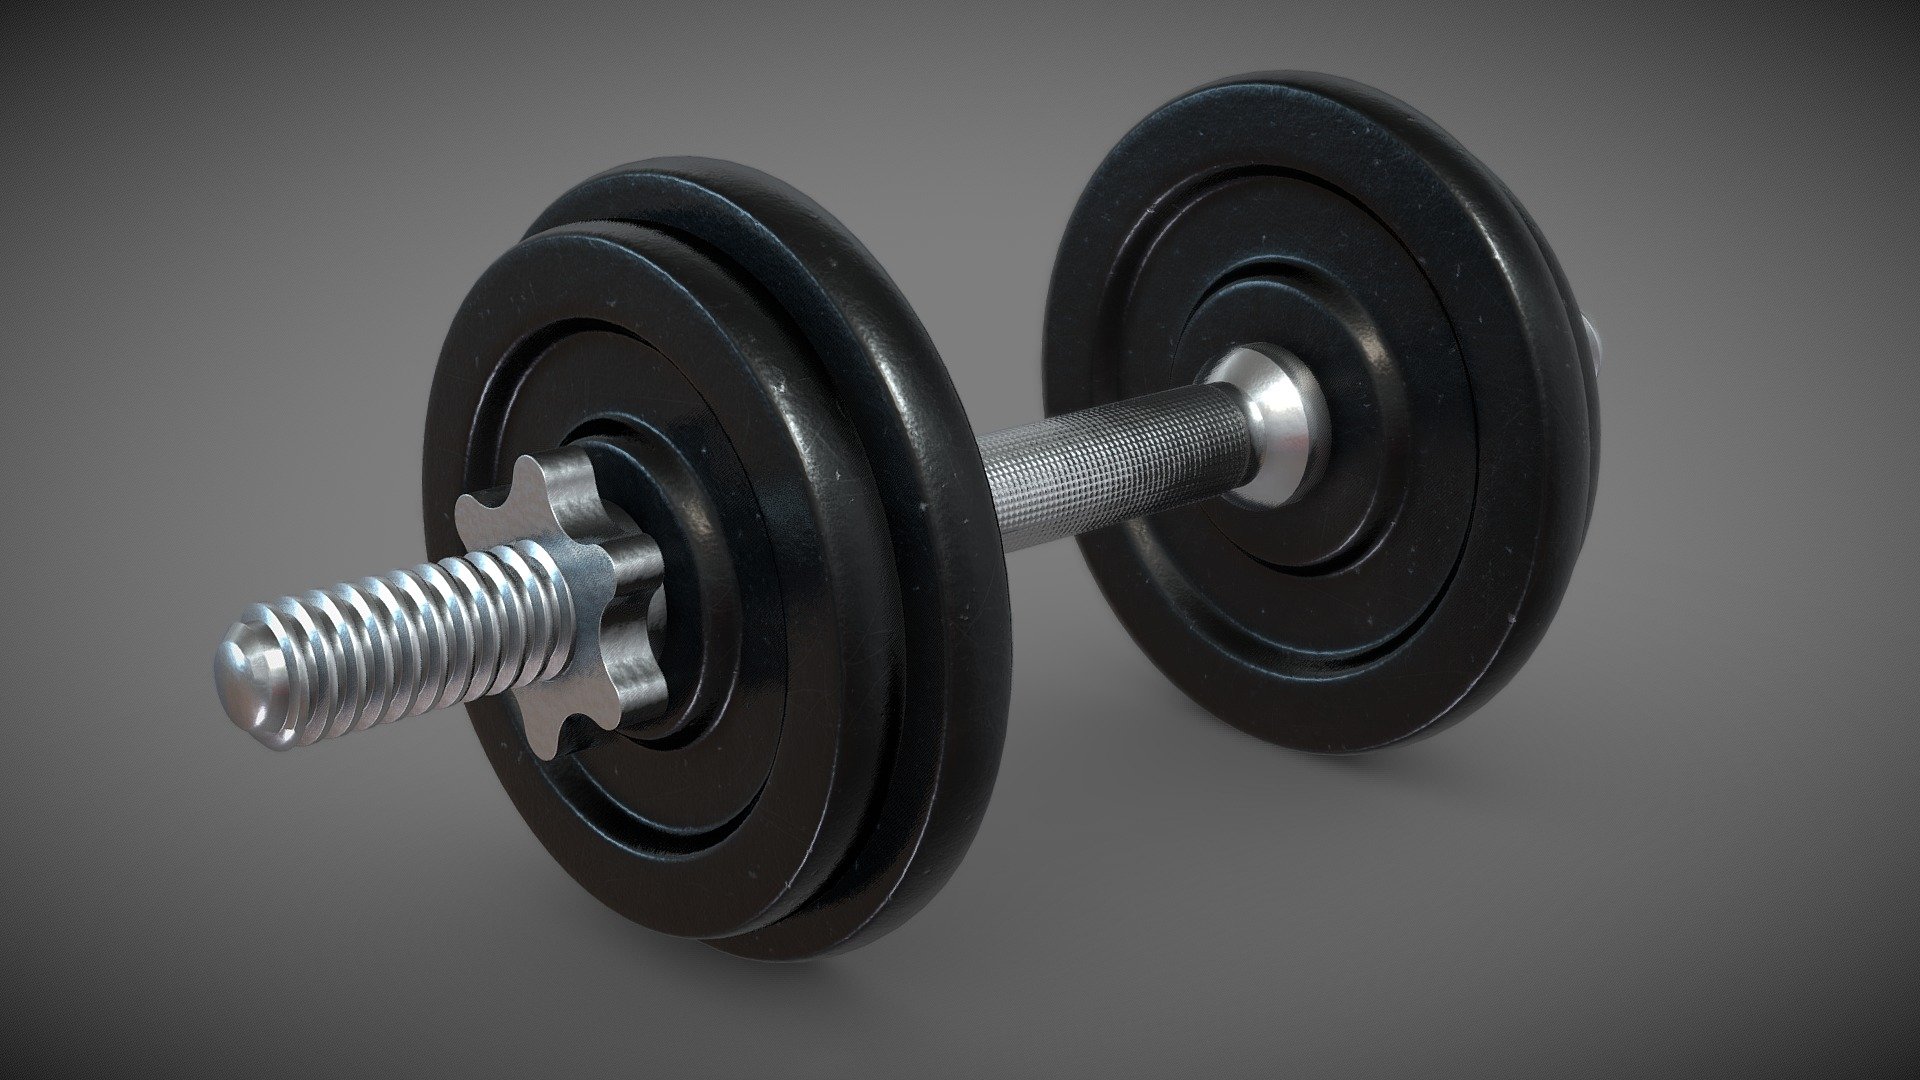 Dumbbell weights 3d model, created with Blender. The materials were originally procedural, but I have baked the materials to texture maps for the sketchfab upload. The textures have been baked to 4K. (4096x4096)

I've created a tutorial on how to make these weights. Check out the tutorial here:  https://youtu.be/MIQ1i-kTWYg

Contents when purchased:


Weights Blender File
Final Render
Scratches Roughness Map
Scratches Normal Map
HDRI Lighting
Procedural Smooth Concrete Project Files

Alternate Version with Baked Textures:


Weights Blender File with Baked Textures
4K Color Map
4K Metallic Map
4K Rougness Map
4K Normal Map
 - Dumbbell Weights - Buy Royalty Free 3D model by Ryan King Art (@ryankingart) 3d model